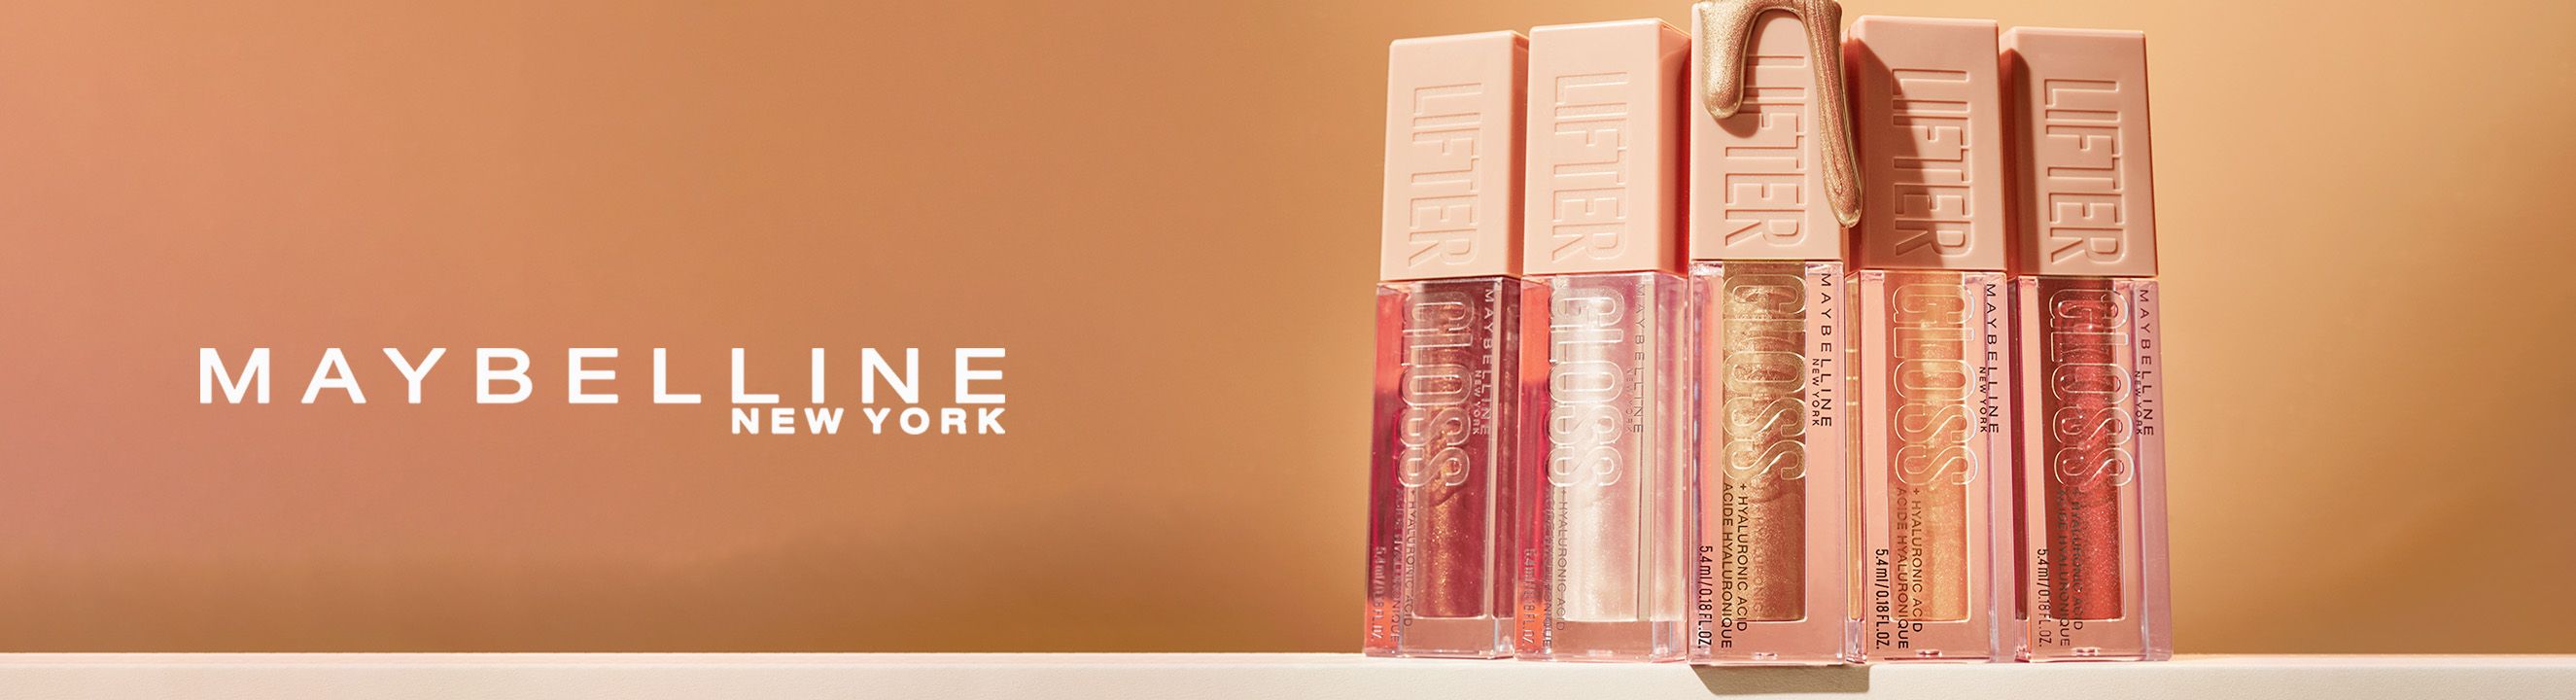 maybelline-new-york?handle=maybelline-new-york-collection